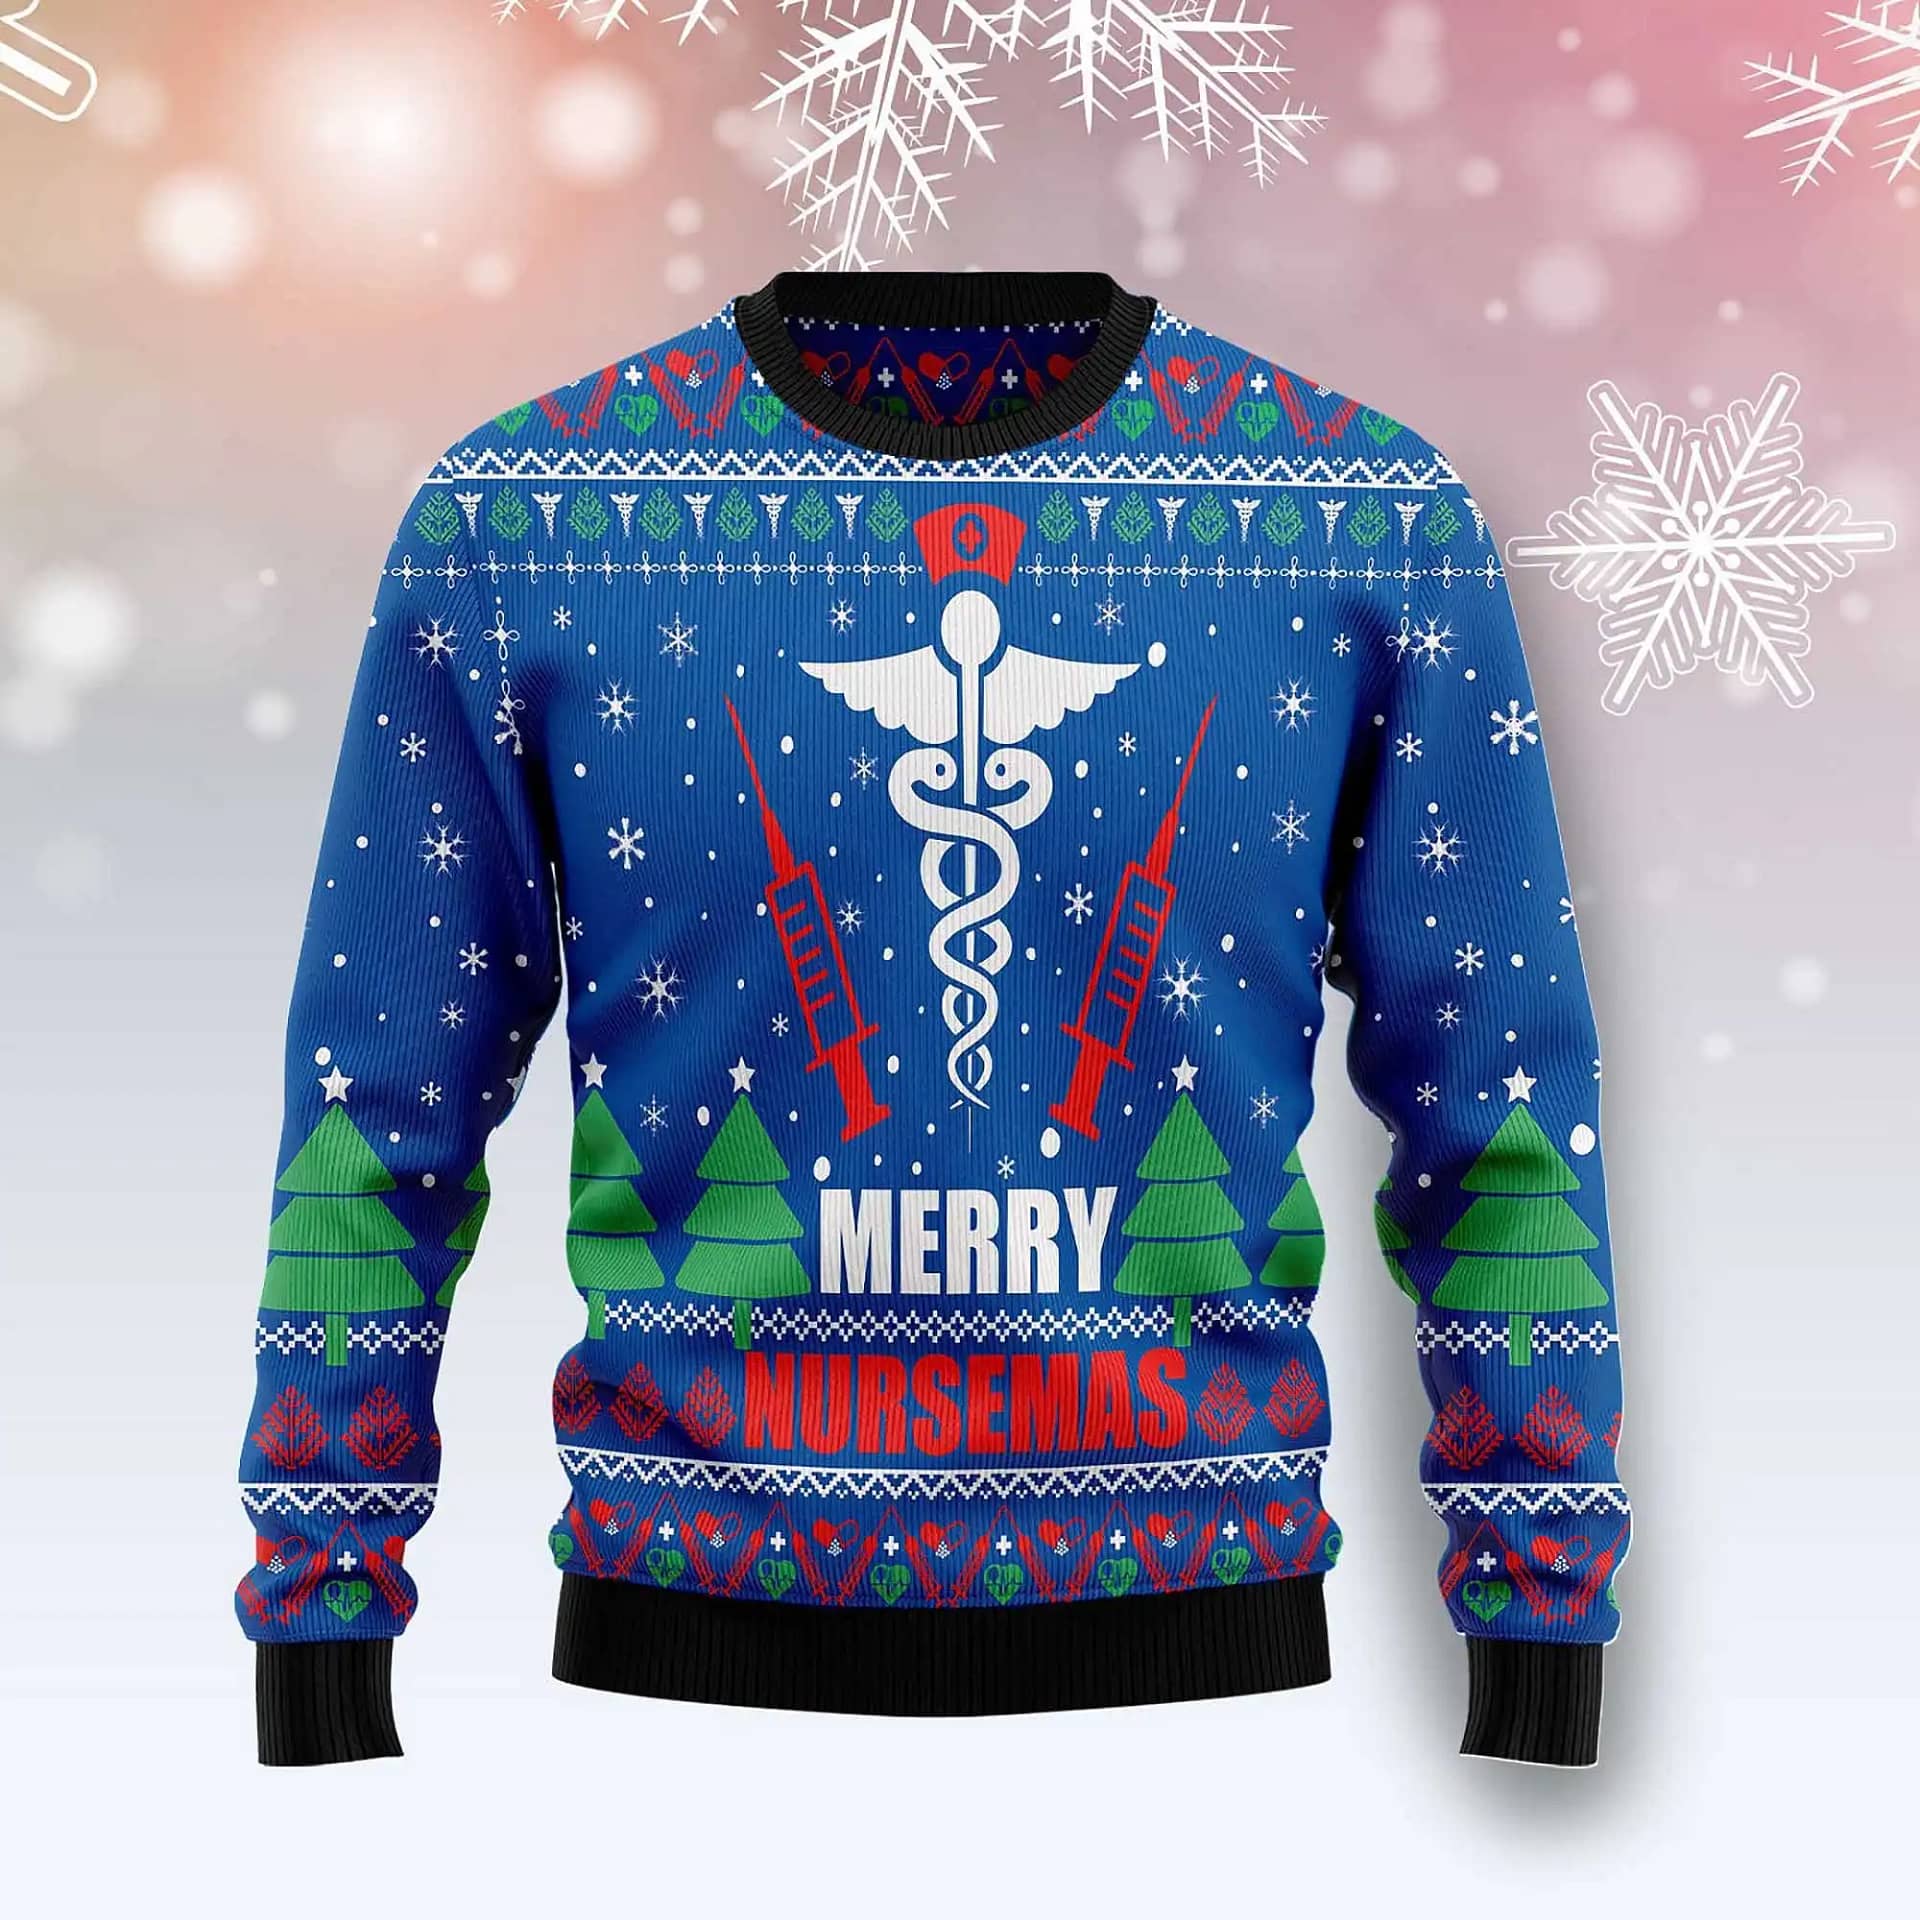 Merry Nursemas Best Holiday Gifts Ugly Sweater